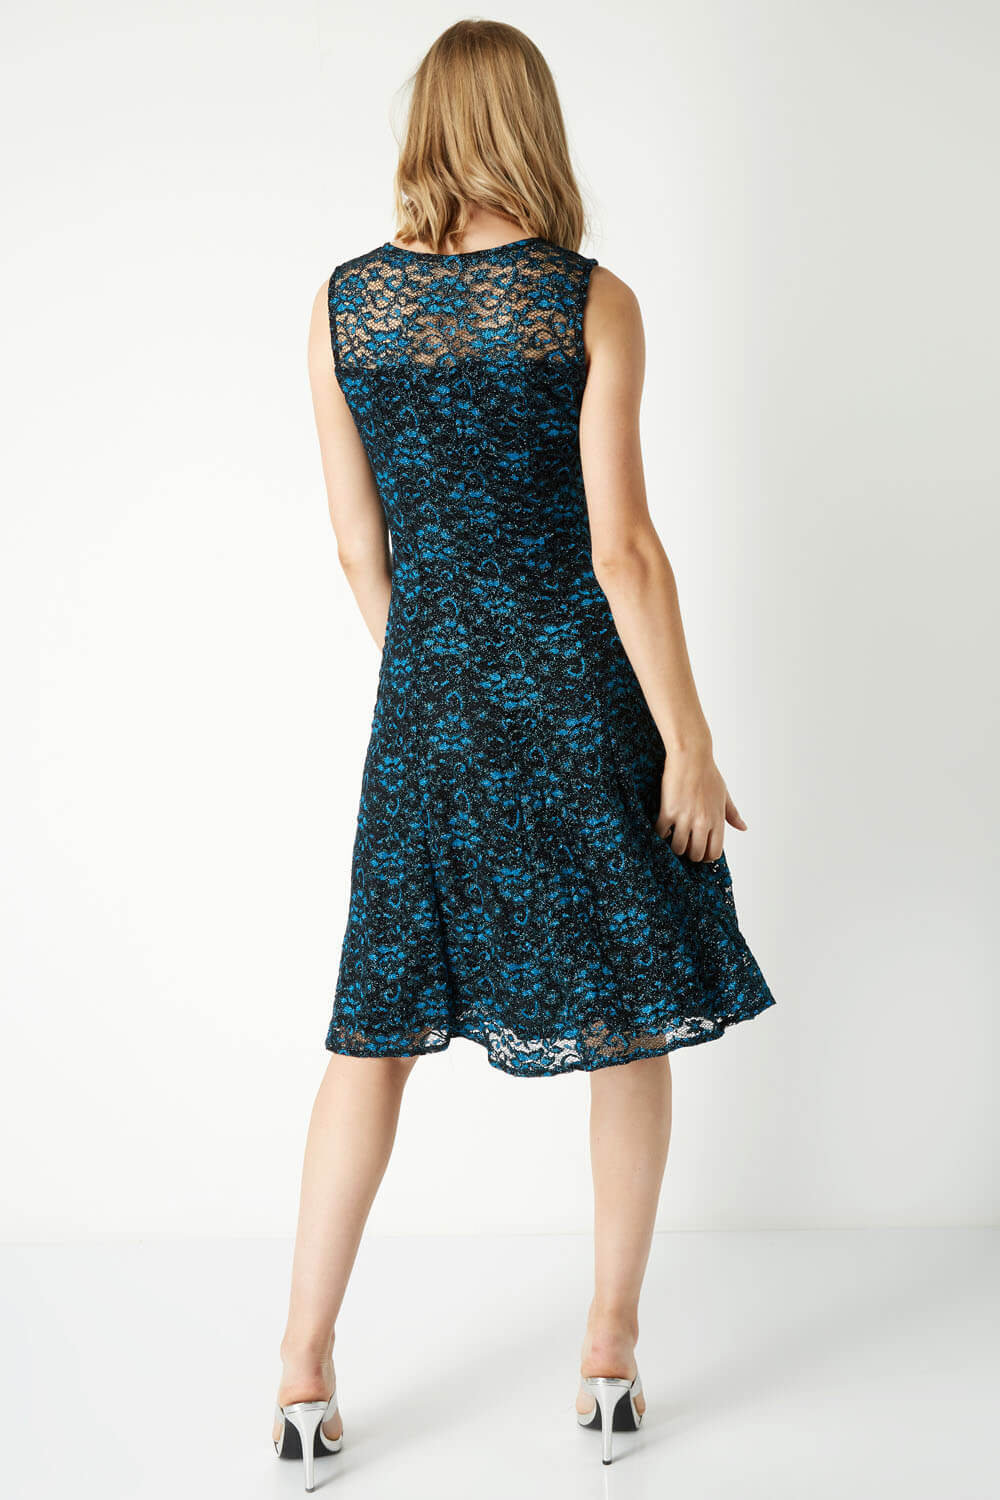 Teal Shimmer Lace Fit and Flare Dress, Image 3 of 5